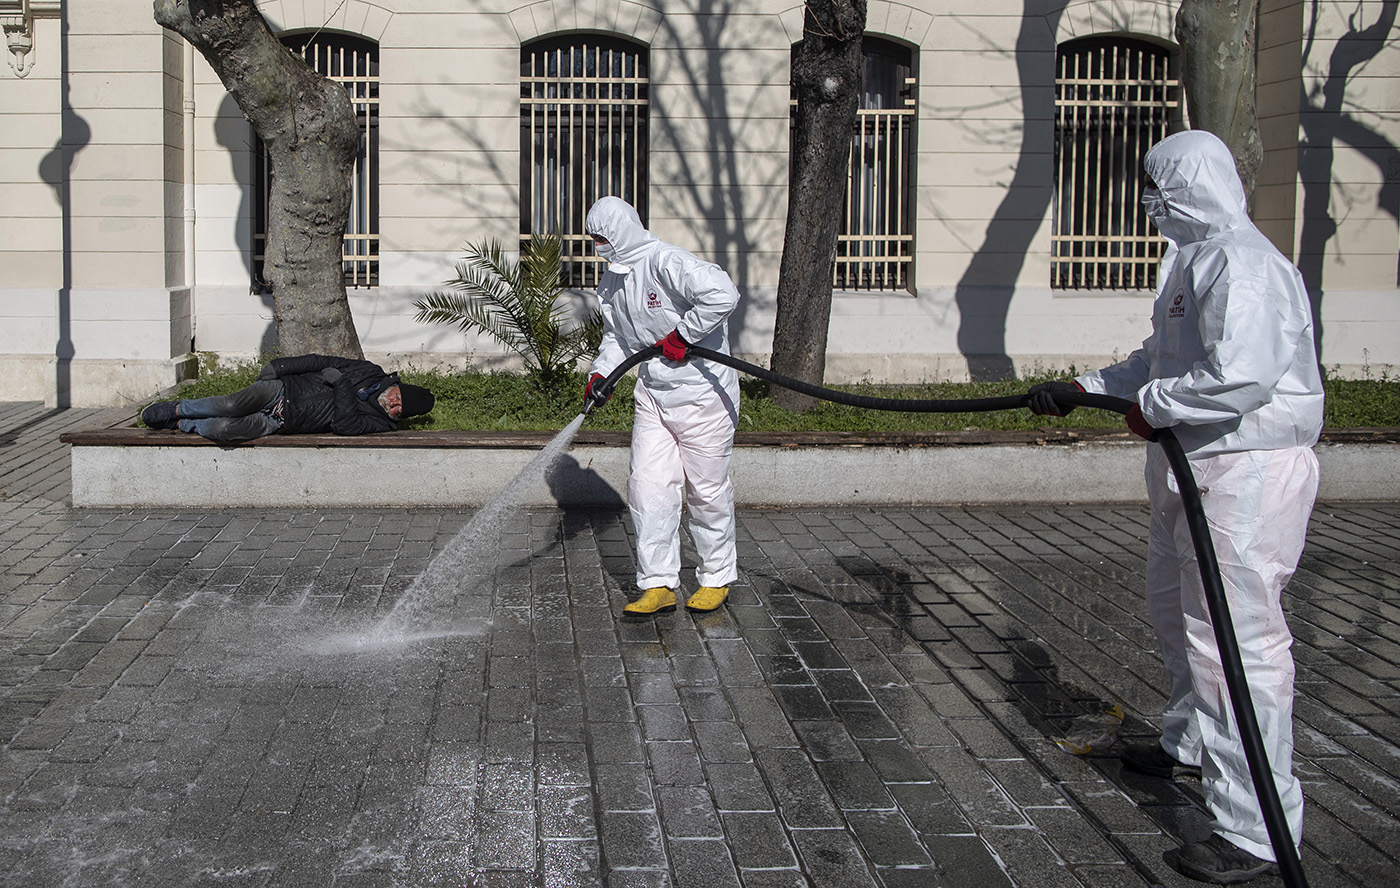 A member of the Fatih Municipality disinfects the Blue Mosque square to prevent the spread of the novel coronavirus COVID-19 in Istanbul, Turkey, 21 March 2020.   The Turkish religious affairs administration announced on 20 March 2020 that all mosques will not be open for community prays like Friday prayers and asked people to pray at home. Turkish health minister Fahrettin Koca on 20 March 2020 said that there are 670 confirmed cases of the coronavirus and 9 related deaths. Turkey decided to halt public events, temporarily shut down schools and suspend sporting events in an attempt to prevent further spreading of coronavirus COVID-19.